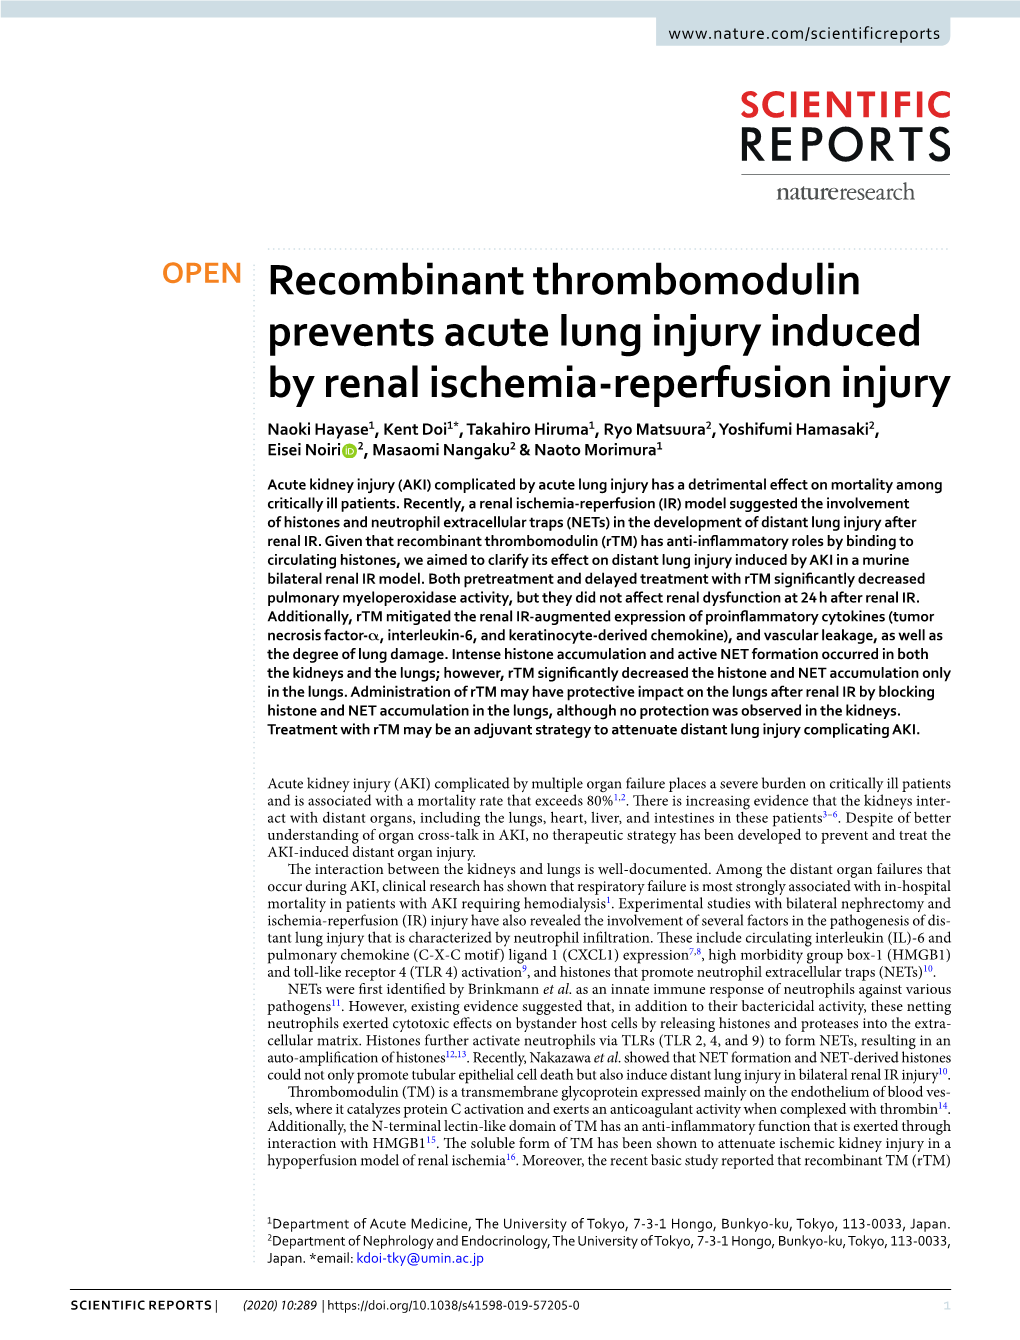 Recombinant Thrombomodulin Prevents Acute Lung Injury Induced